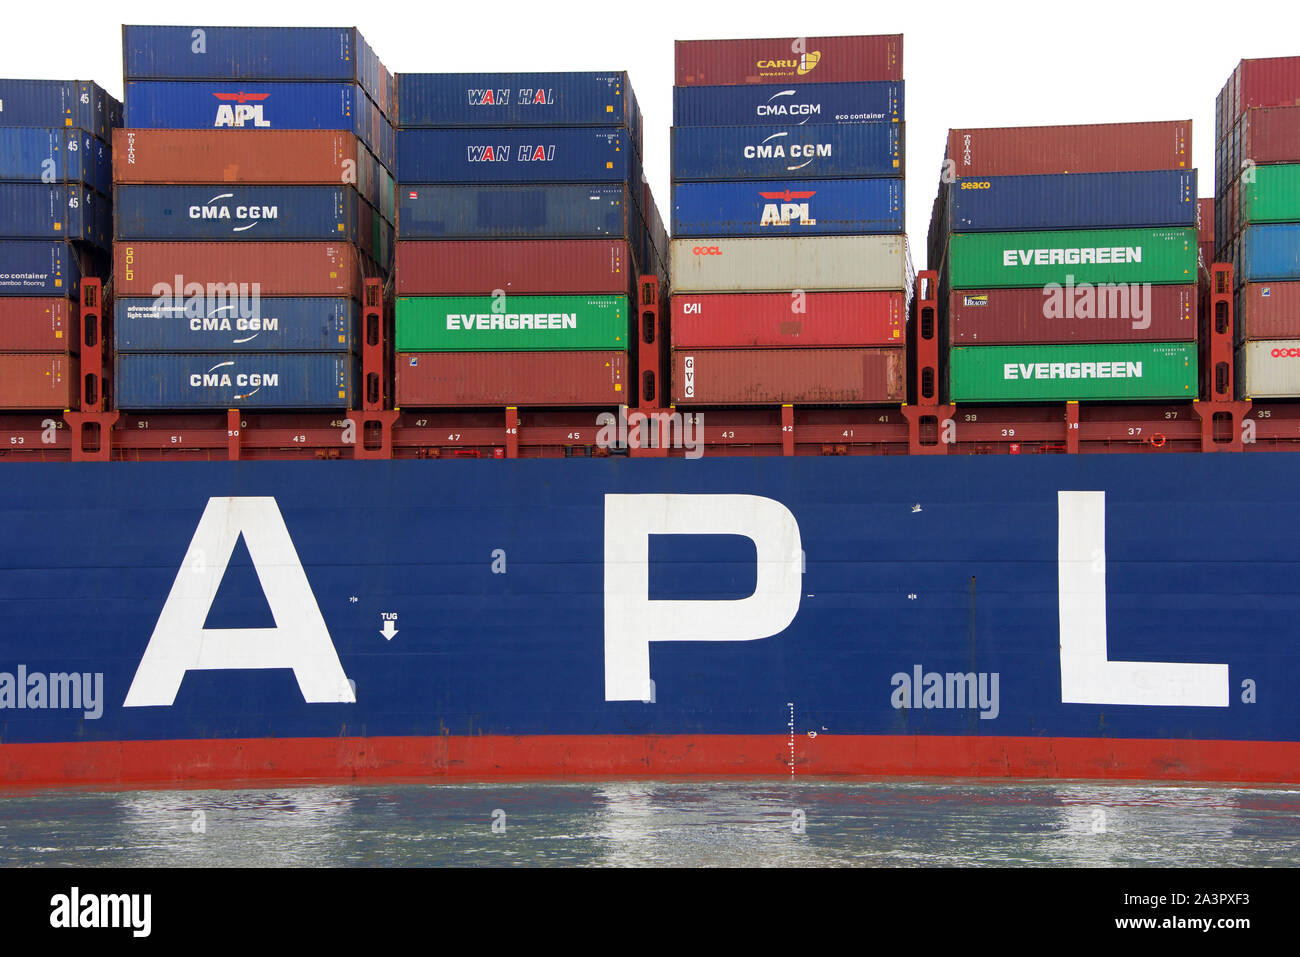 Oakland, CA - July 01, 2019: Cargo ship APL YANGSHAN maneuver out of the Port of Oakland. American President Lines (APL) is the worlds 7th largest con Stock Photo